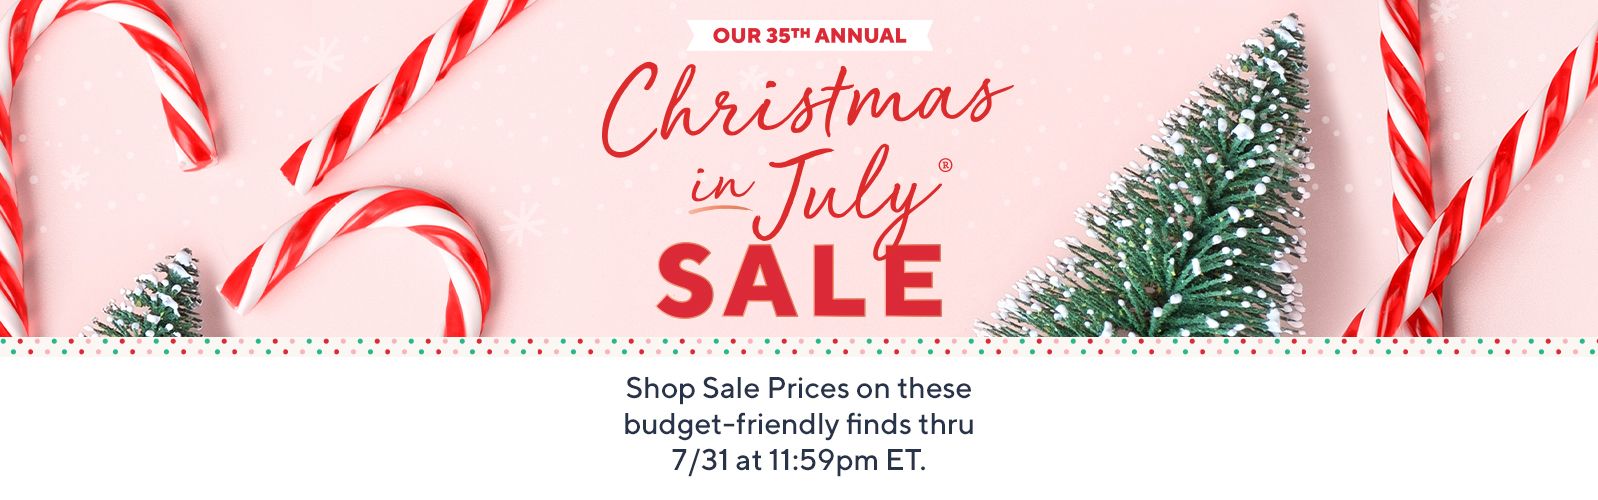 Christmas in July® Sale. Shop Sale Prices on these budget-friendly finds thru 7/31 at 11:59pm ET.